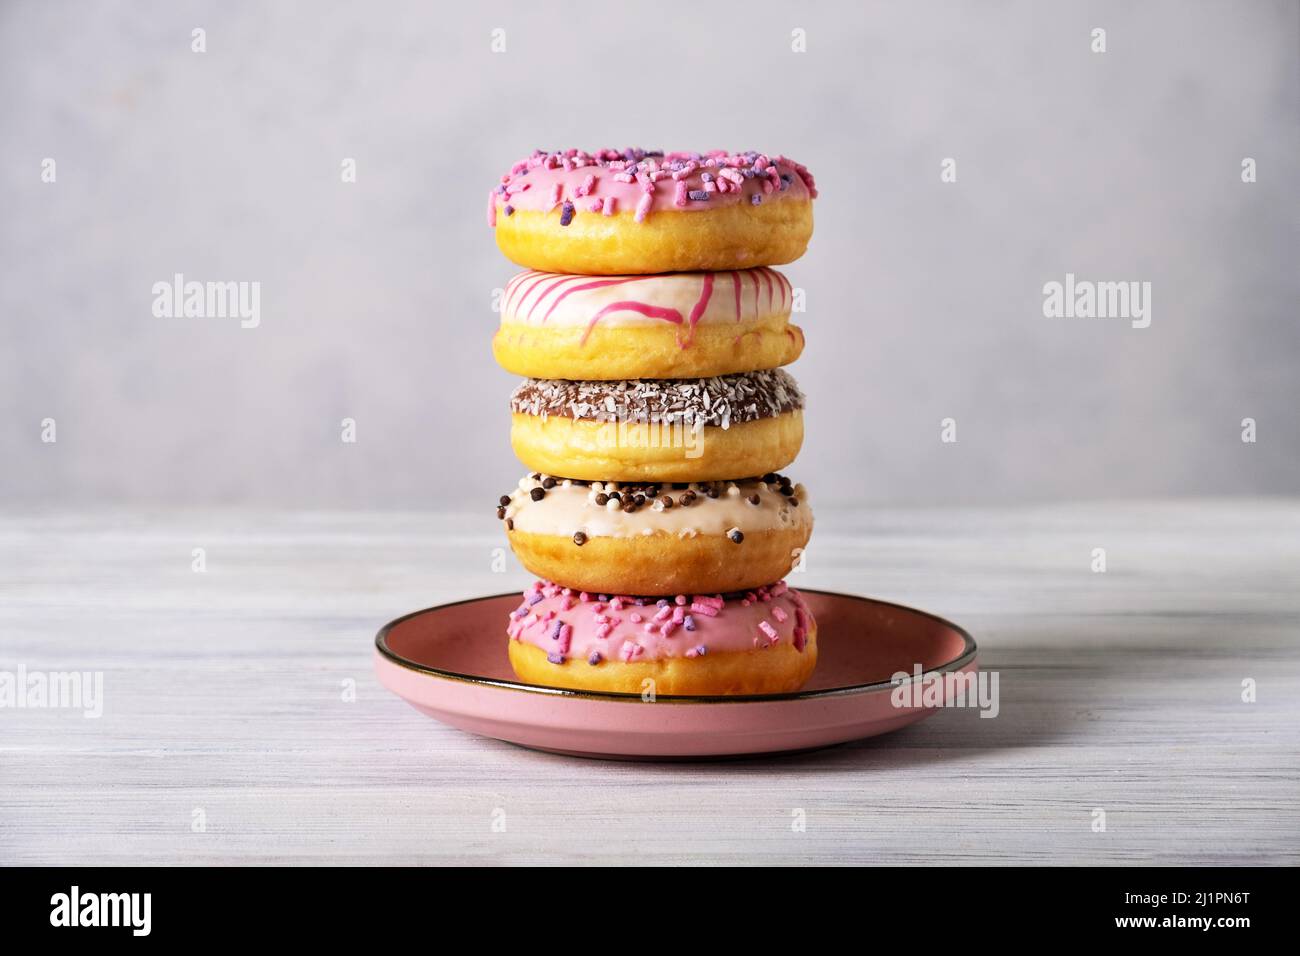 Stack of various colorful donuts on pink ceramic plate Stock Photo